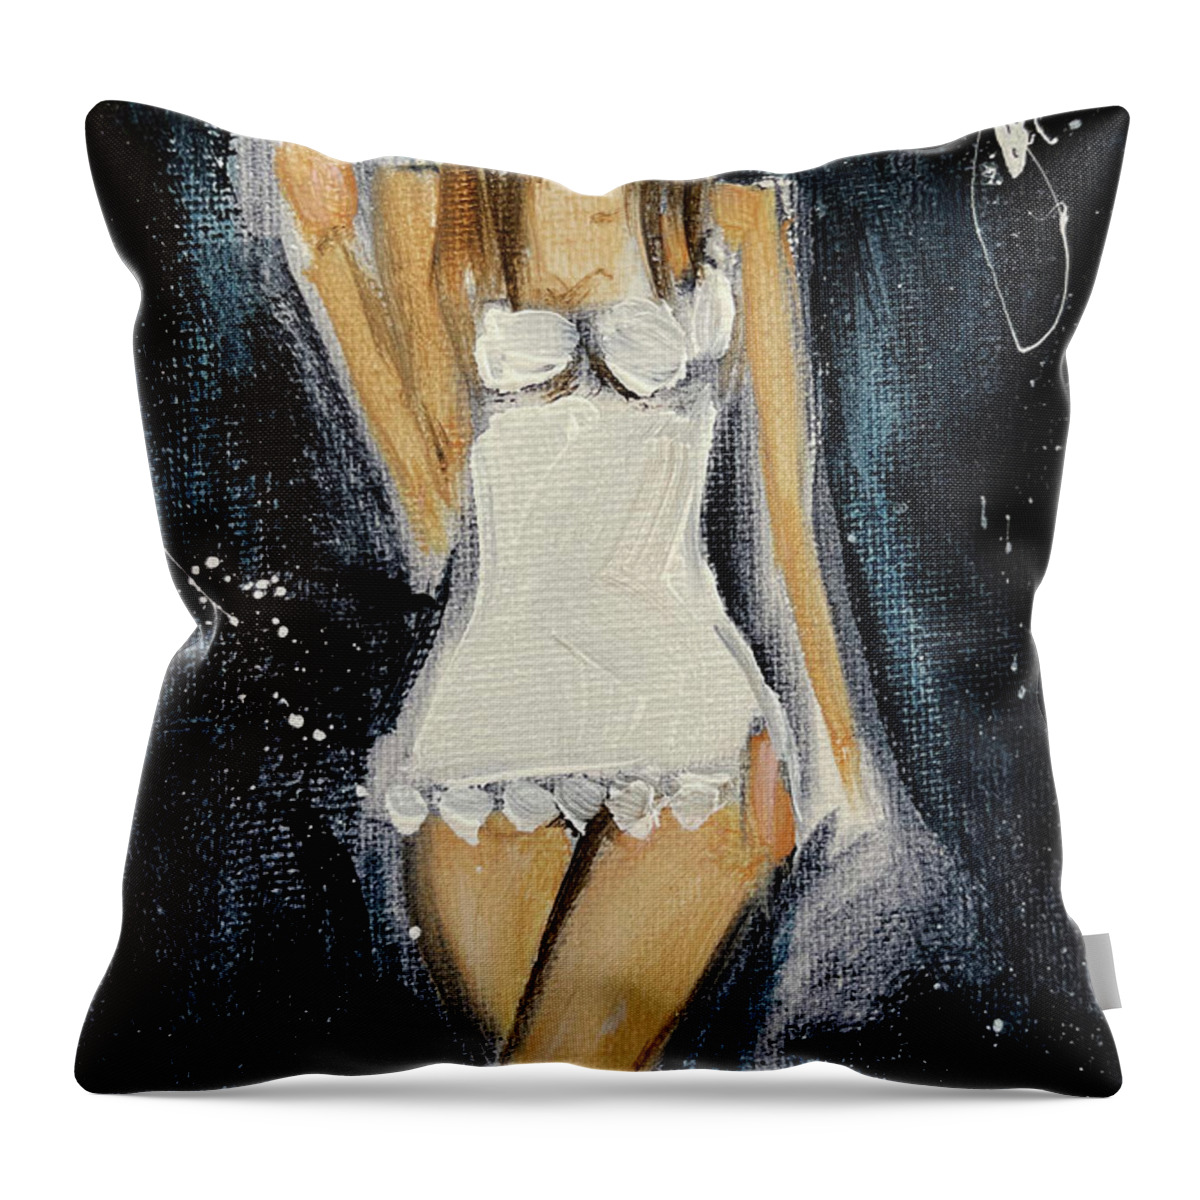 Chemise Throw Pillow featuring the painting The White Chemise by Roxy Rich